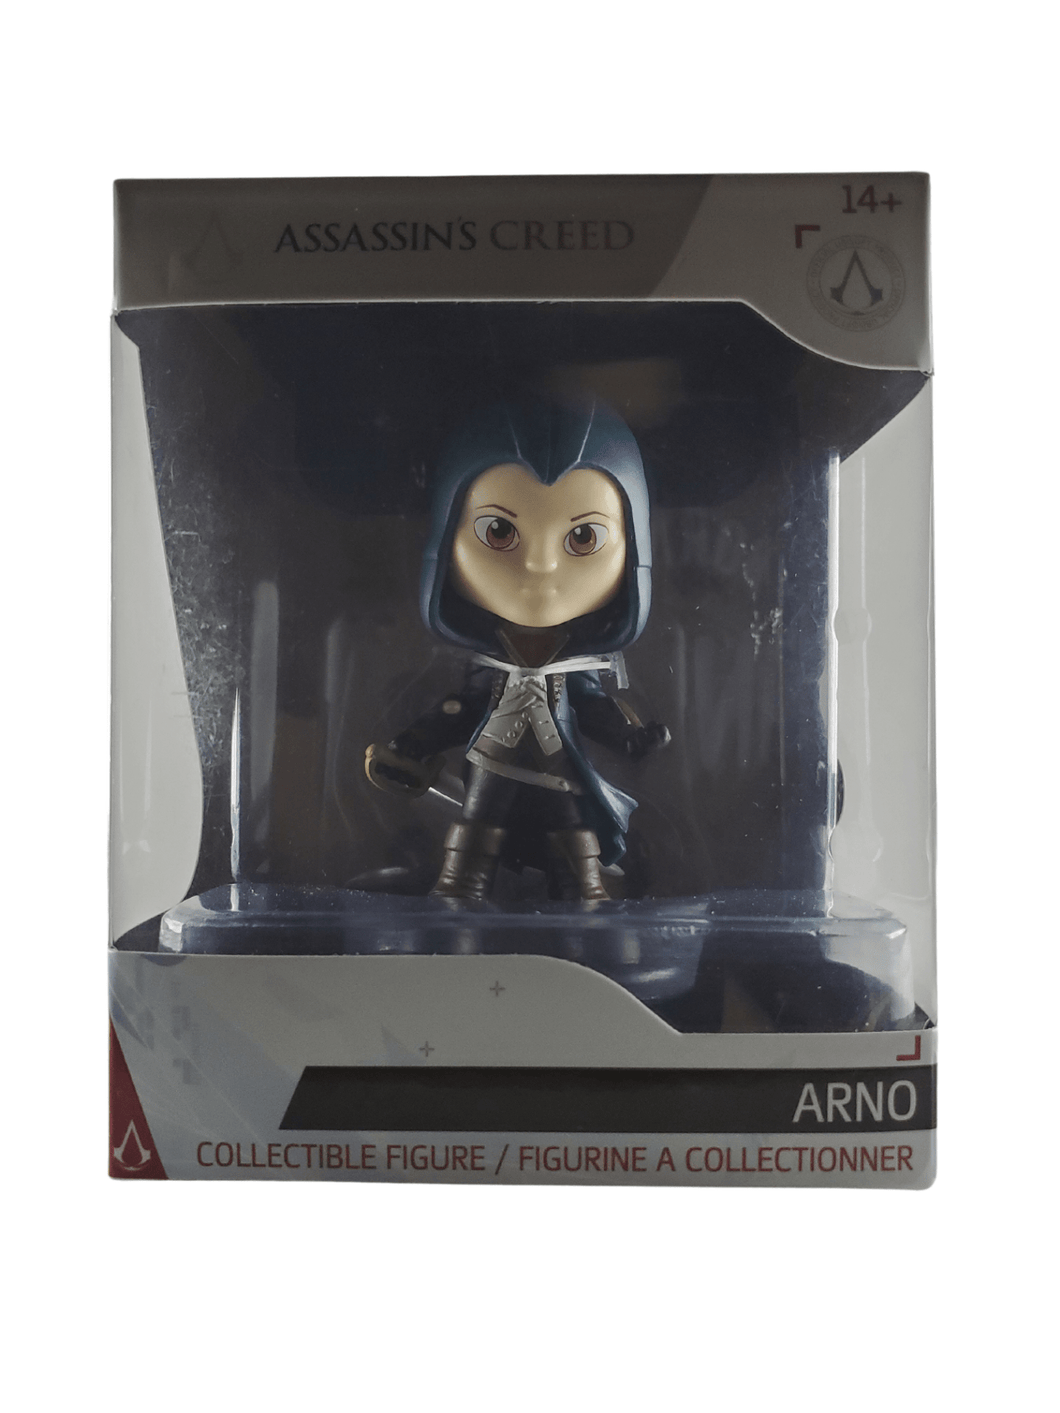 Assassin's Creed Arno Xtreme Play Vinyl Figure